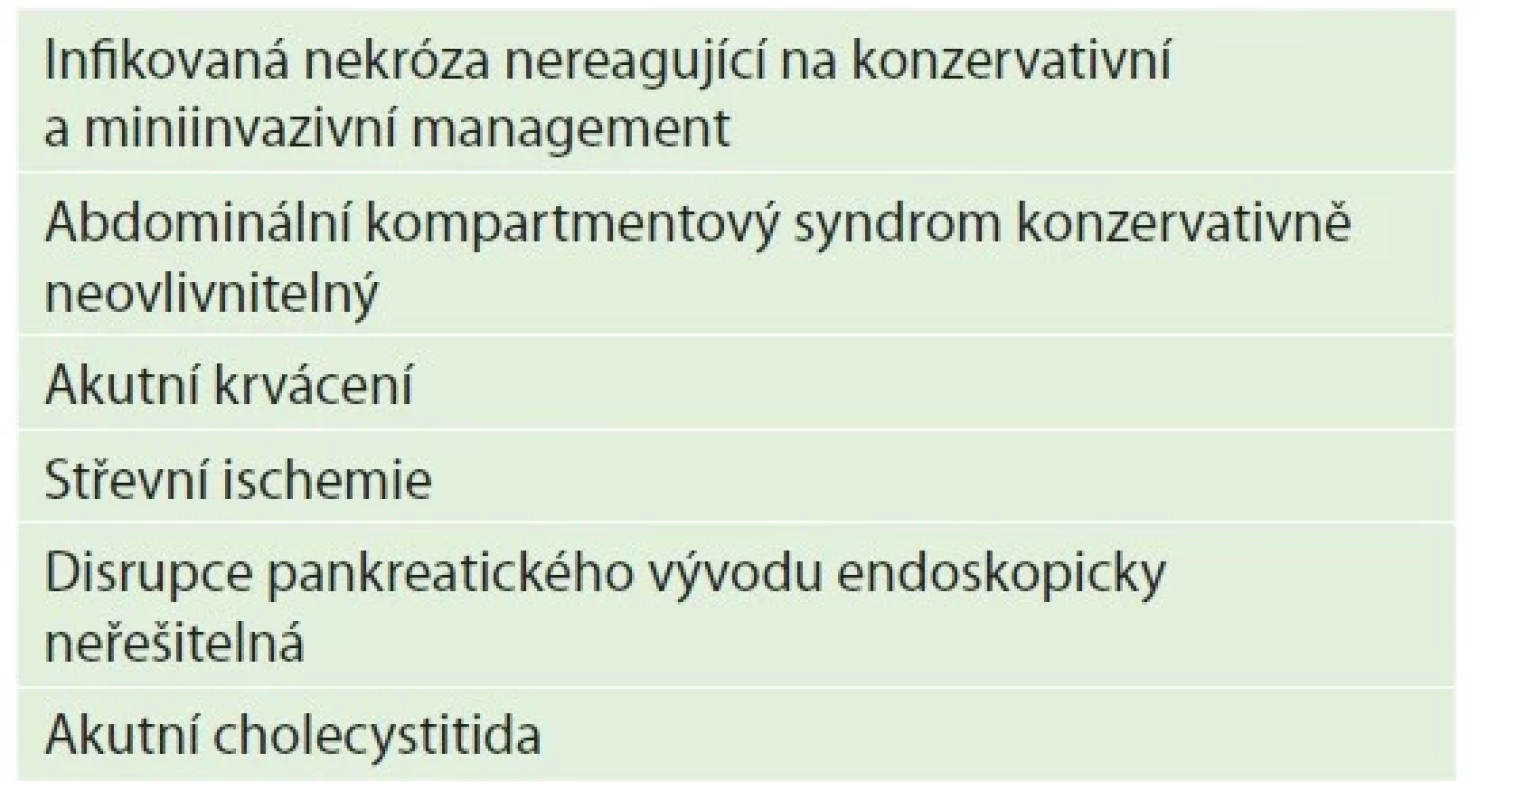 Indikace chirurgické léčby [1]<br>
Tab. 4: Indications for surgical treatment [1]